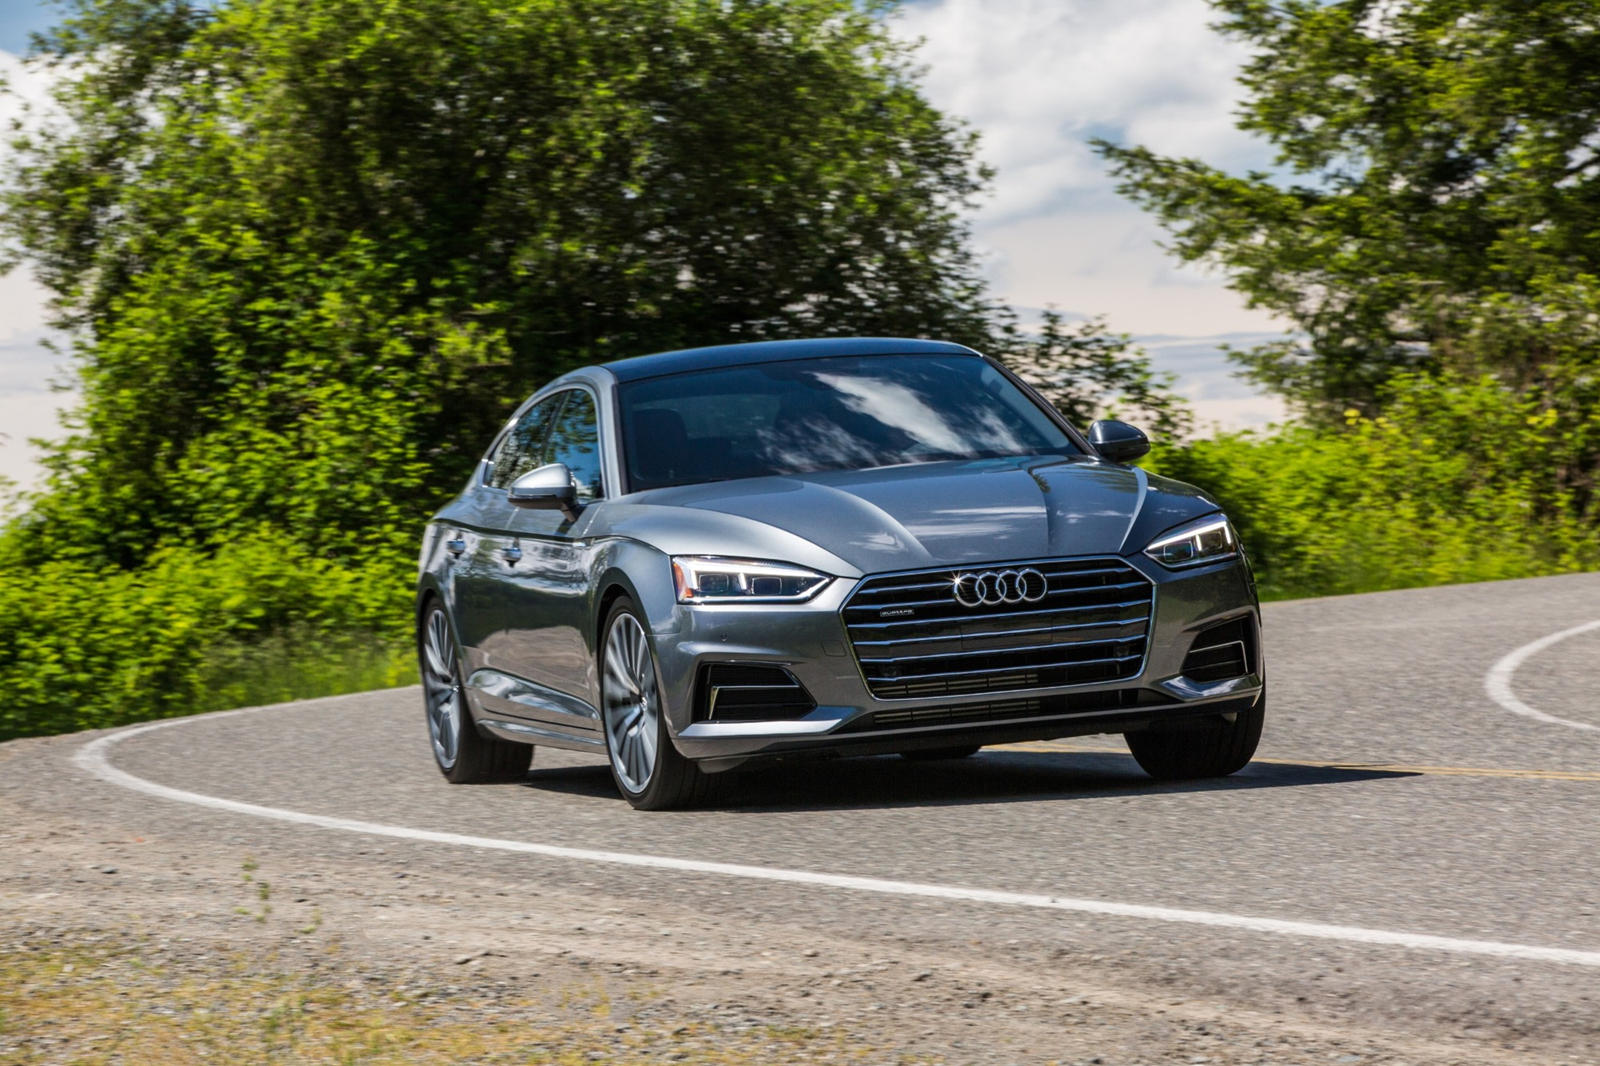 2018 Audi A5 Sportback Front View Driving